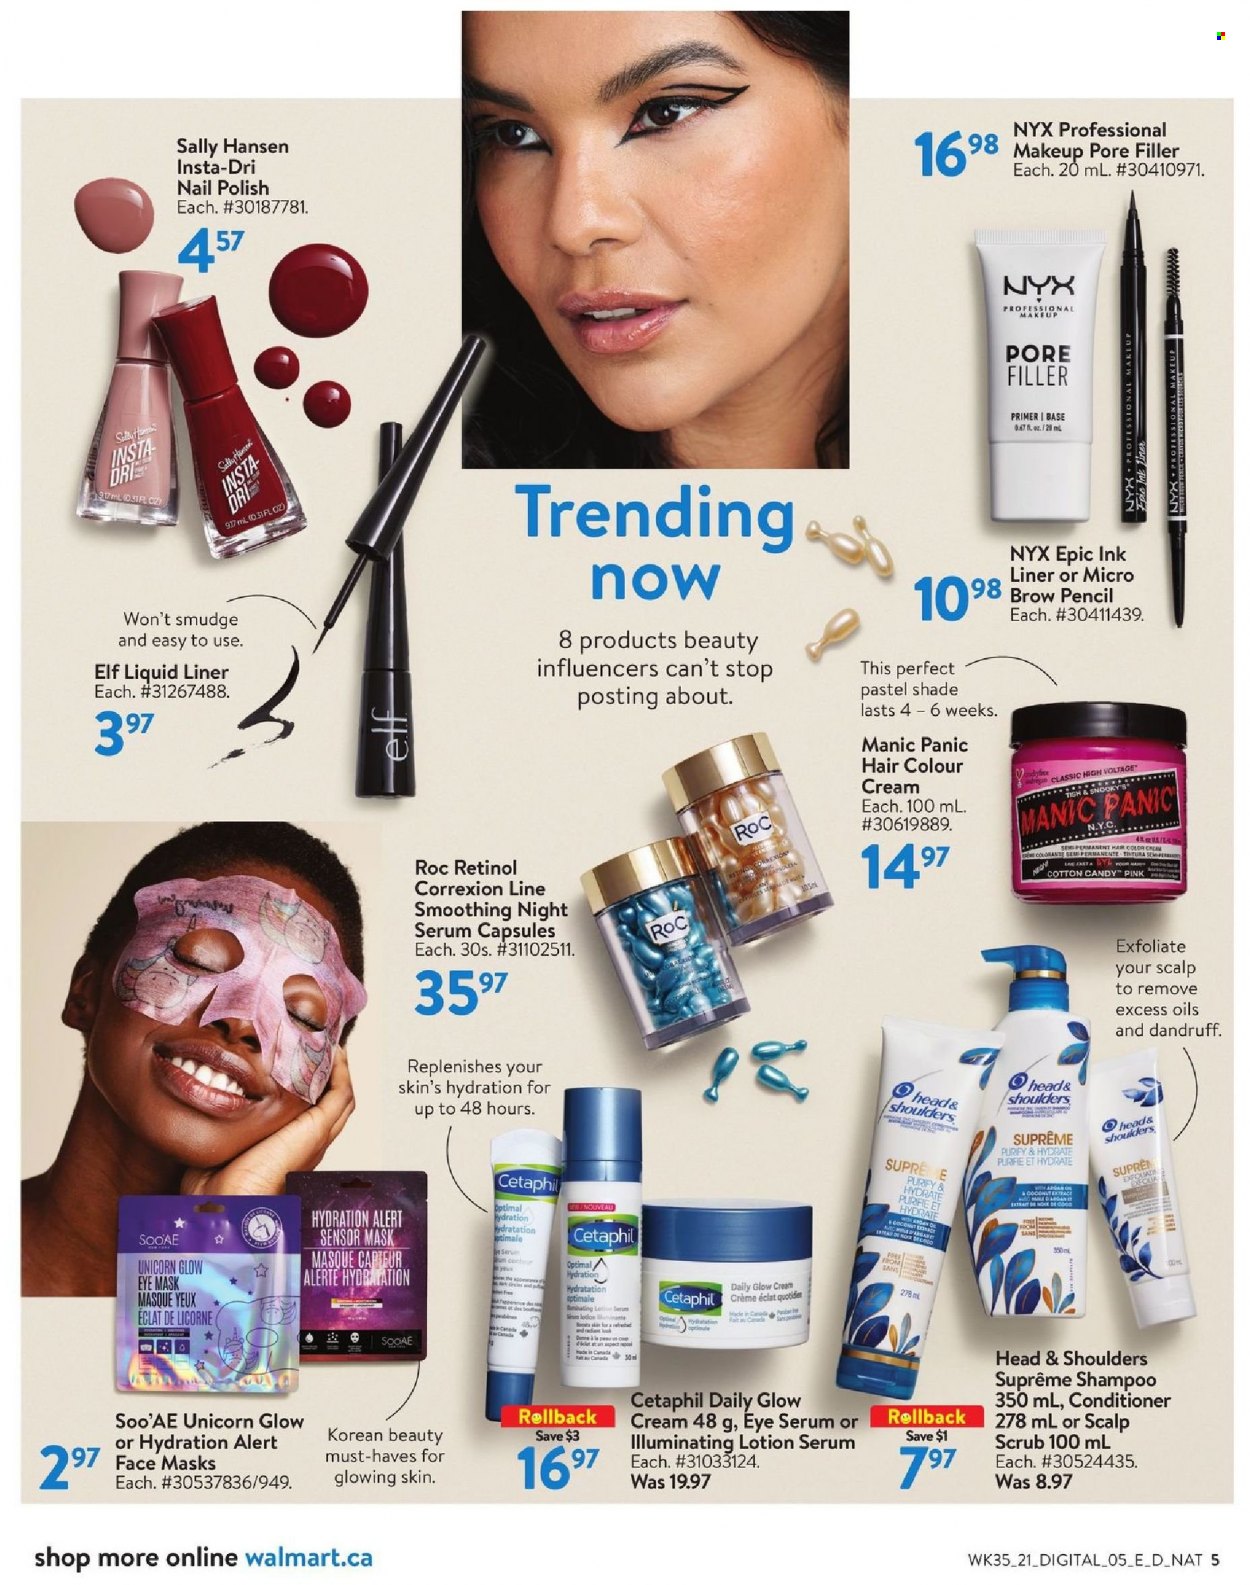 thumbnail - Walmart Flyer - September 23, 2021 - October 20, 2021 - Sales products - cotton candy, Fanta, serum, face mask, NYX Cosmetics, conditioner, hair color, body lotion, Eclat, polish, makeup, pencil, Elf, Sally Hansen, shampoo, Head & Shoulders. Page 19.